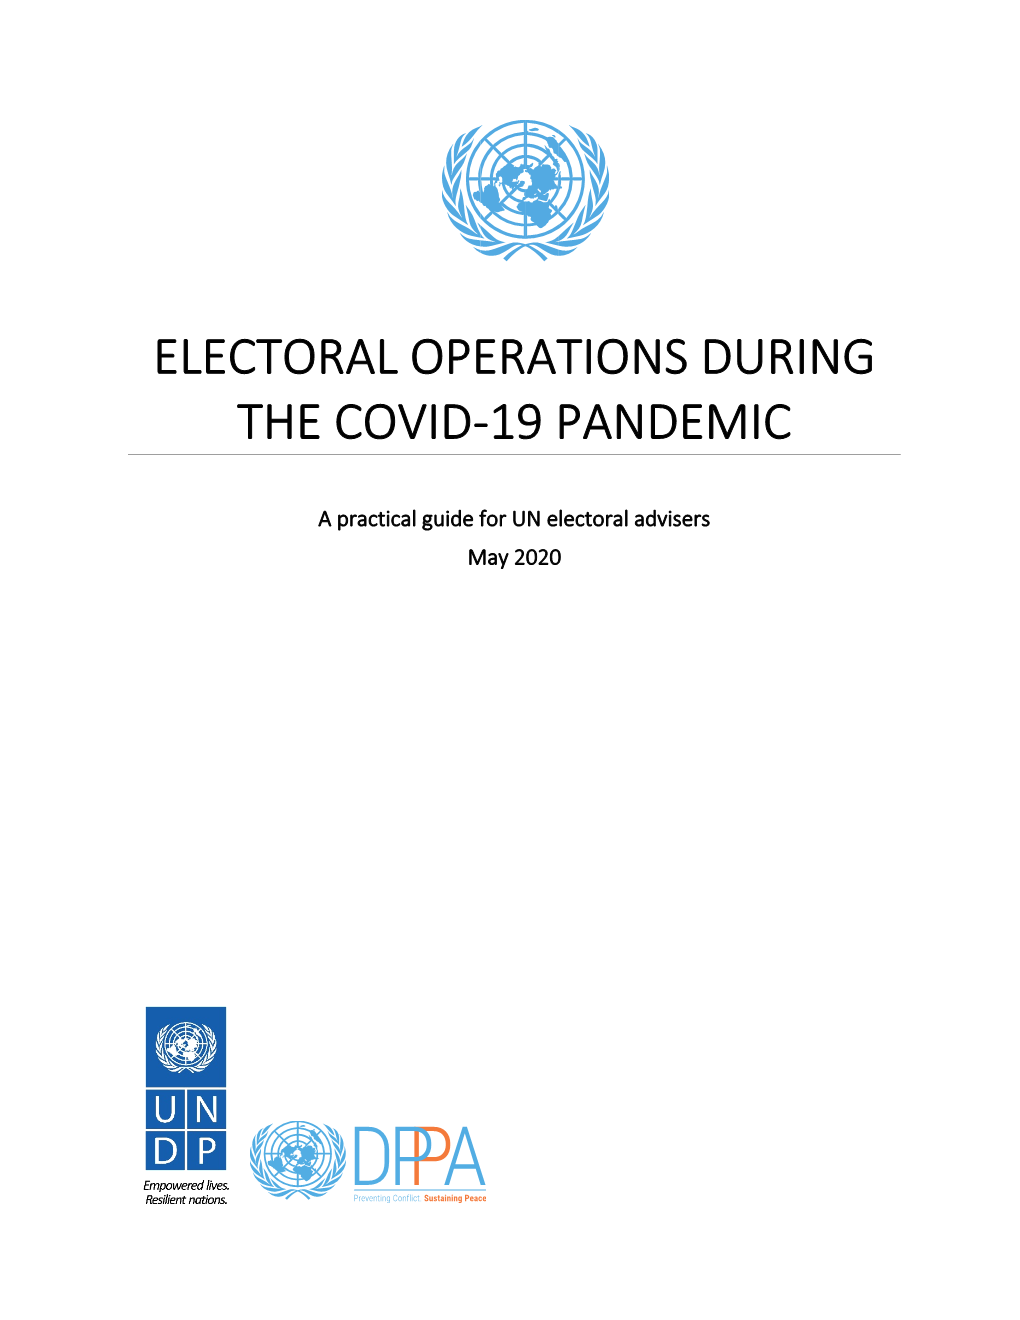 Electoral Operations During the Covid-19 Pandemic